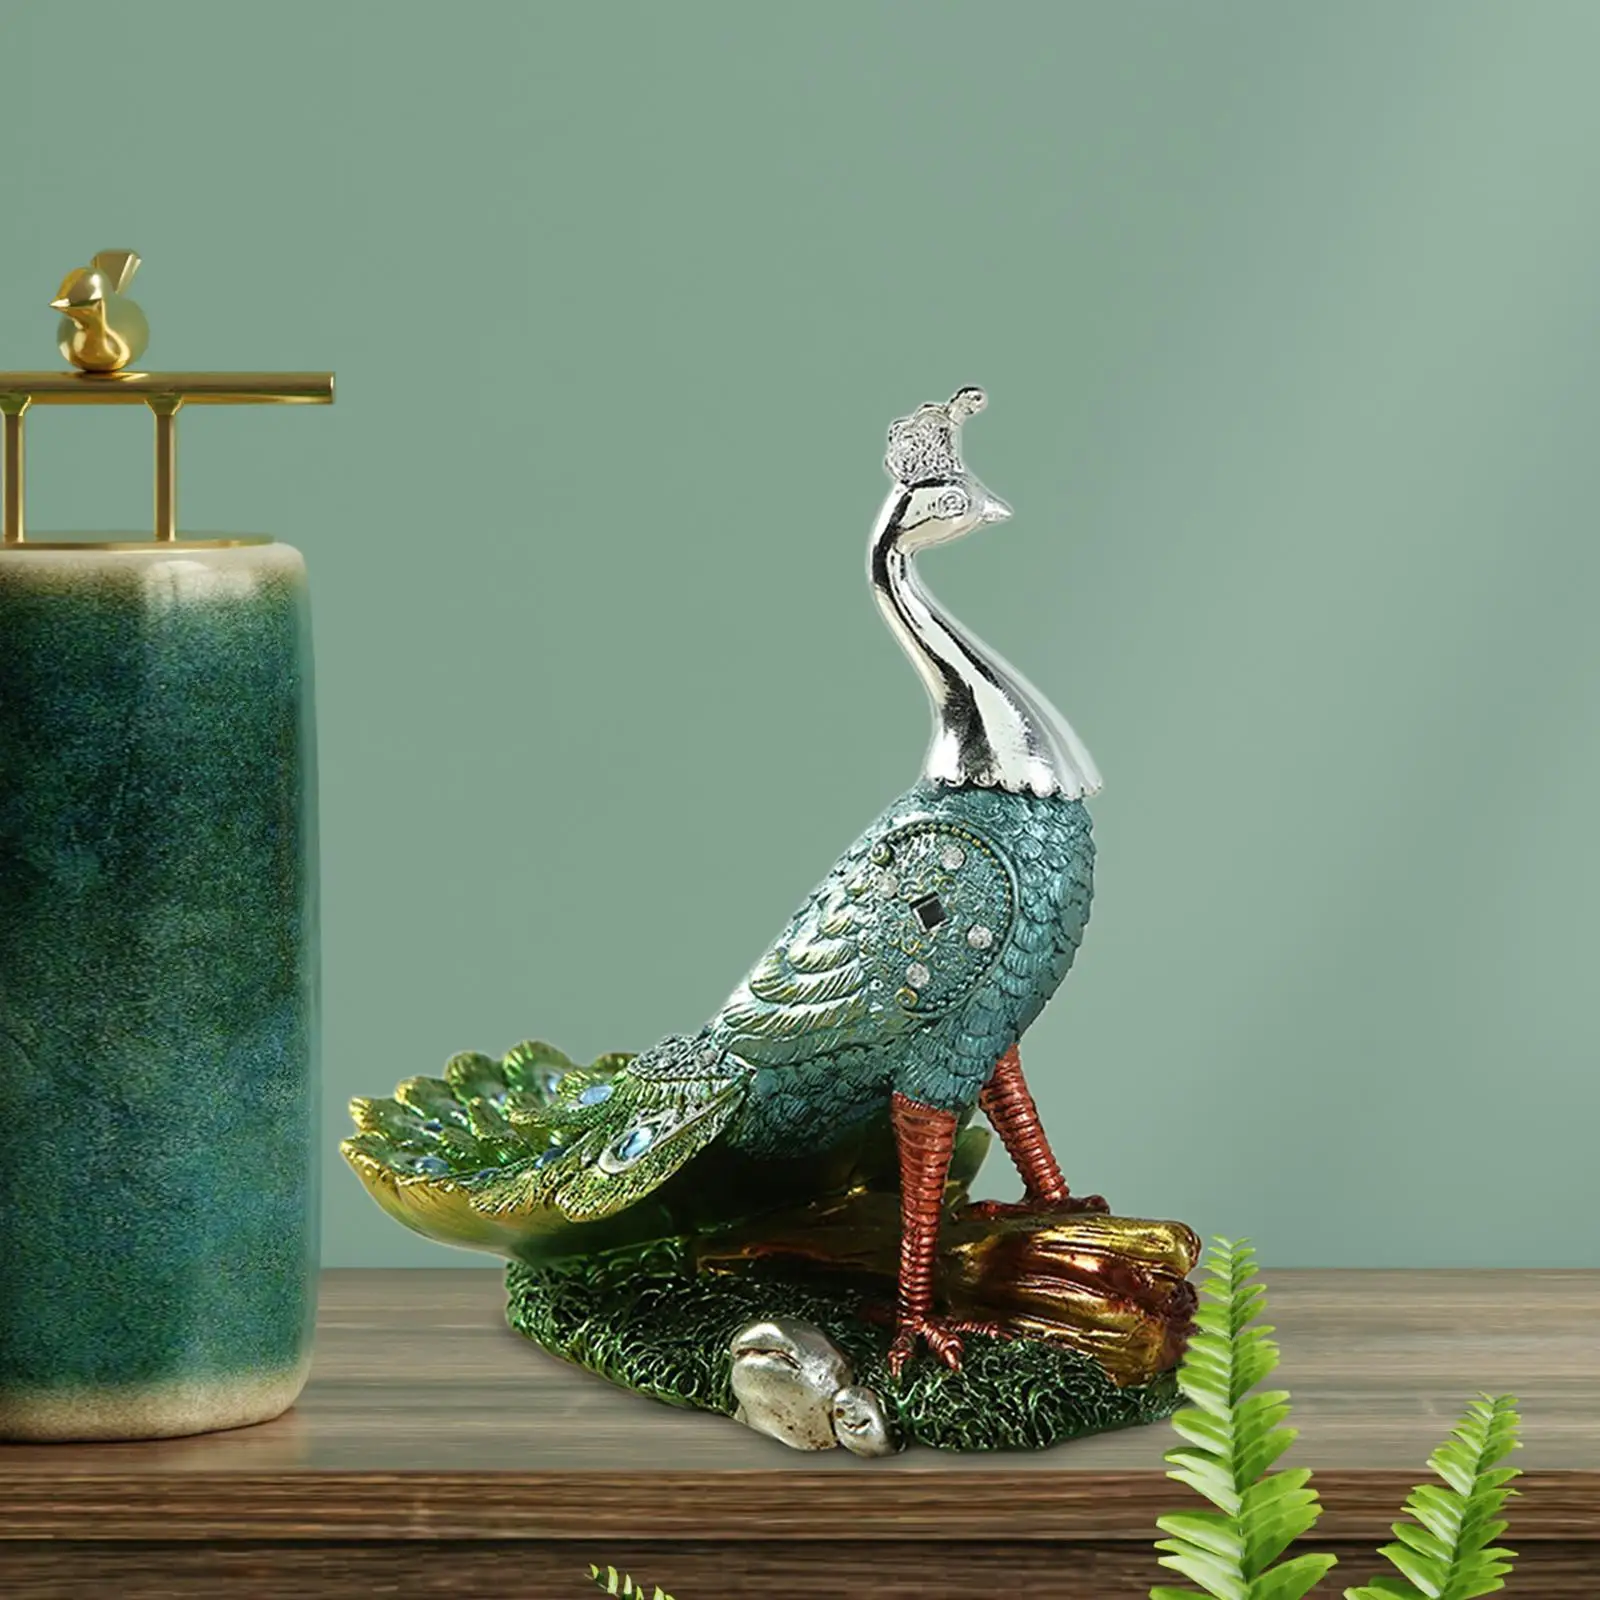 Peacock Ornament Resin Gift Statuette Crafts Sculpture Animal Model for Tabletop Home Decoration Bedside Table Bedroom Christmas